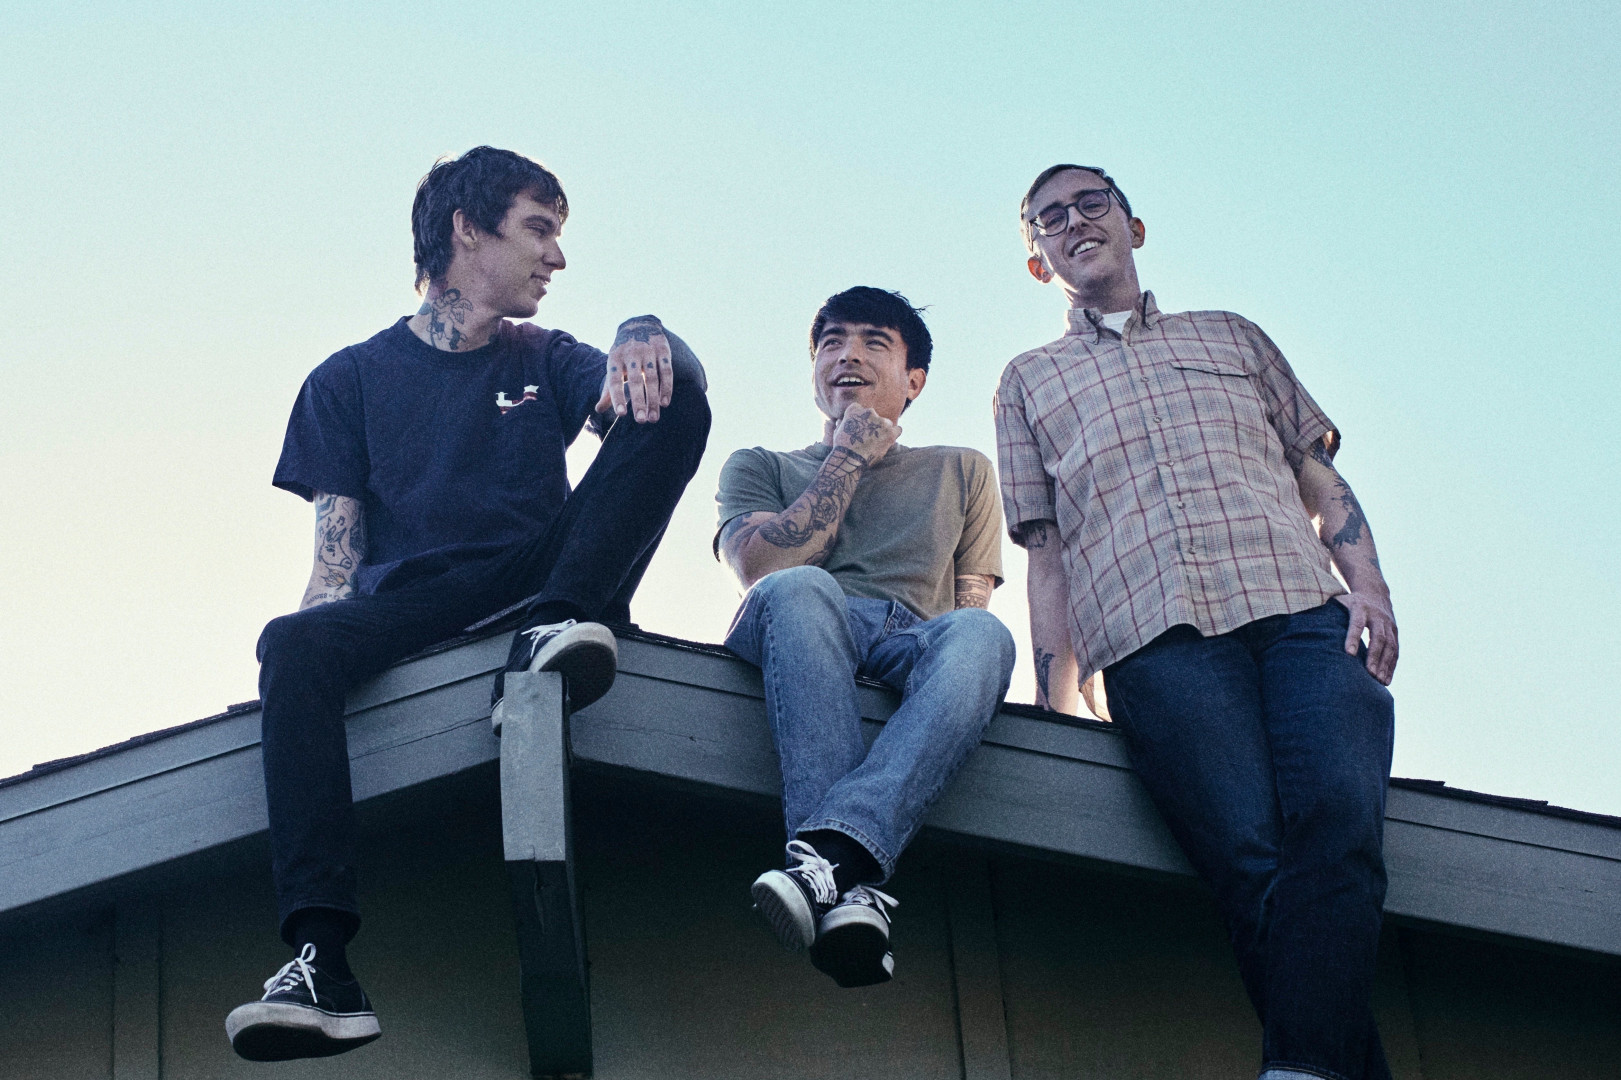 Joyce Manor: "Did You Ever Know?"